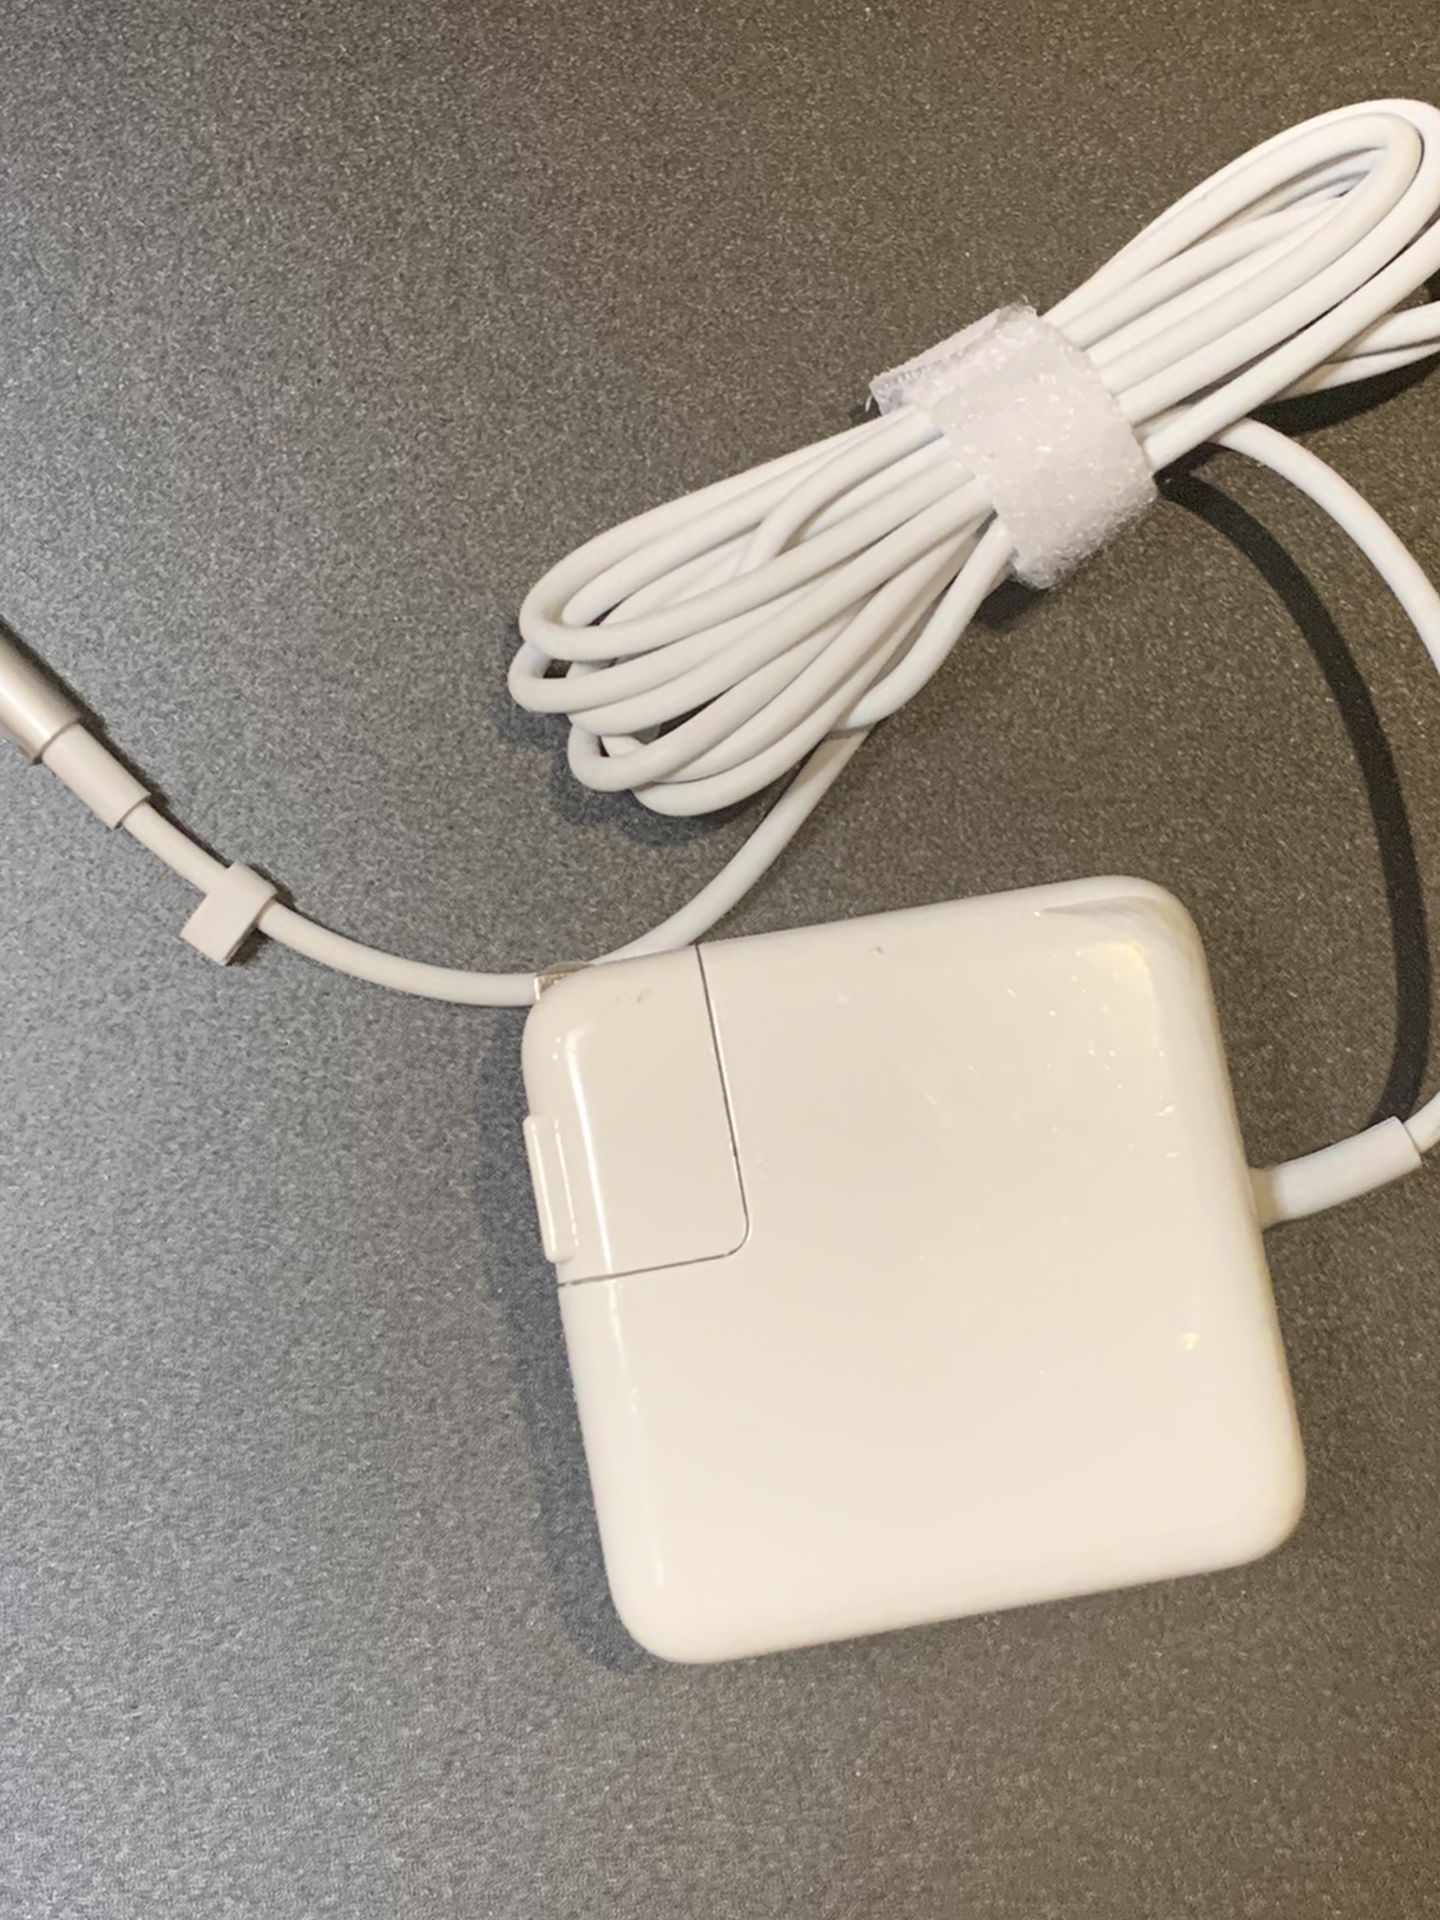 Macbook Pro Charger Old Model